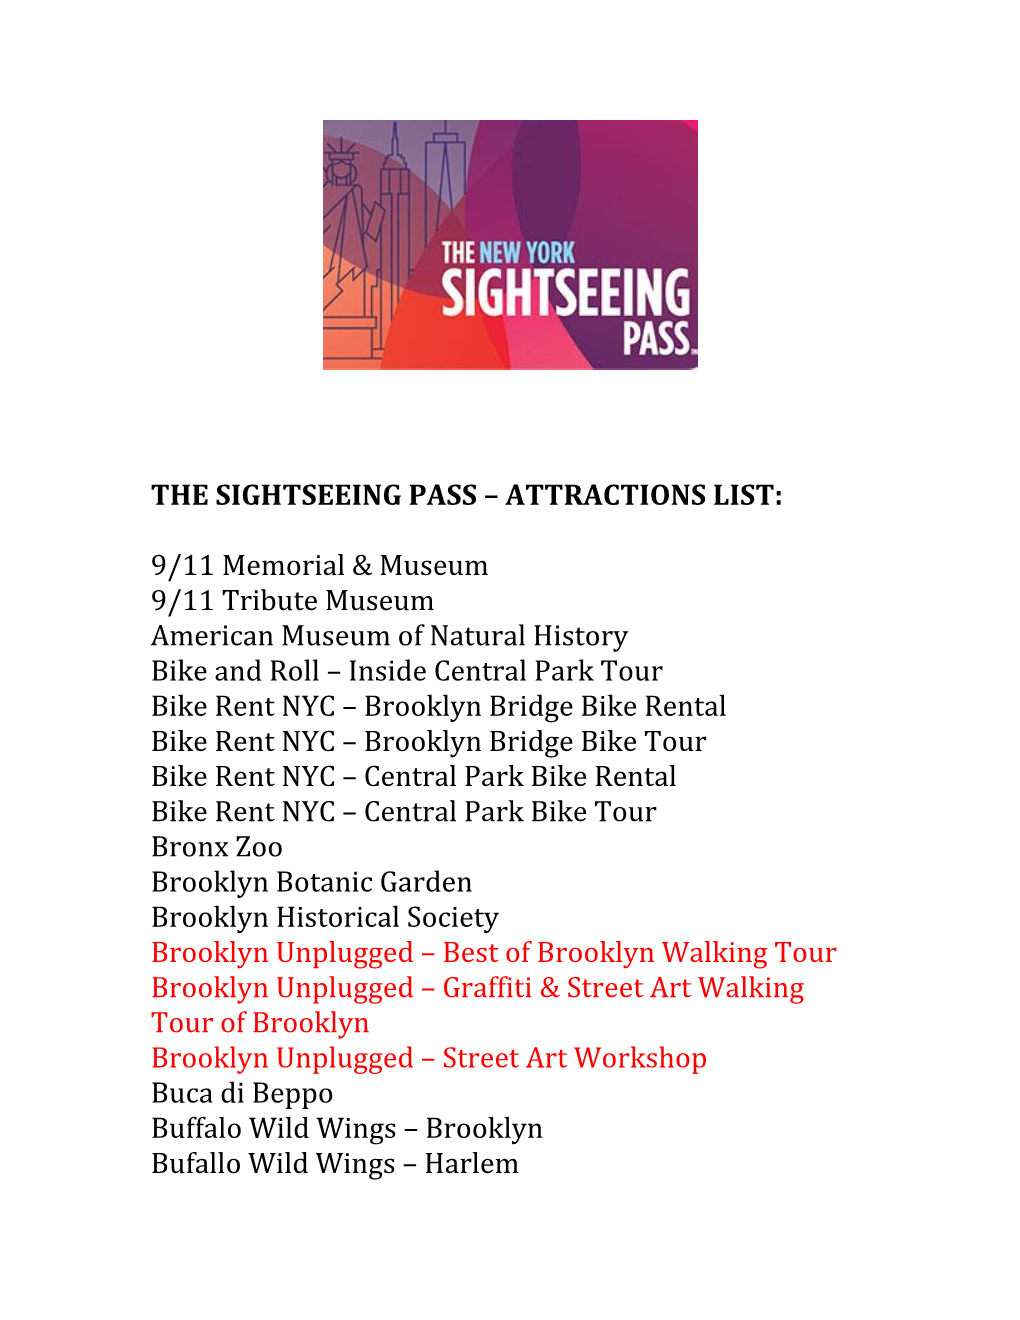 The Sightseeing Pass – Attractions List